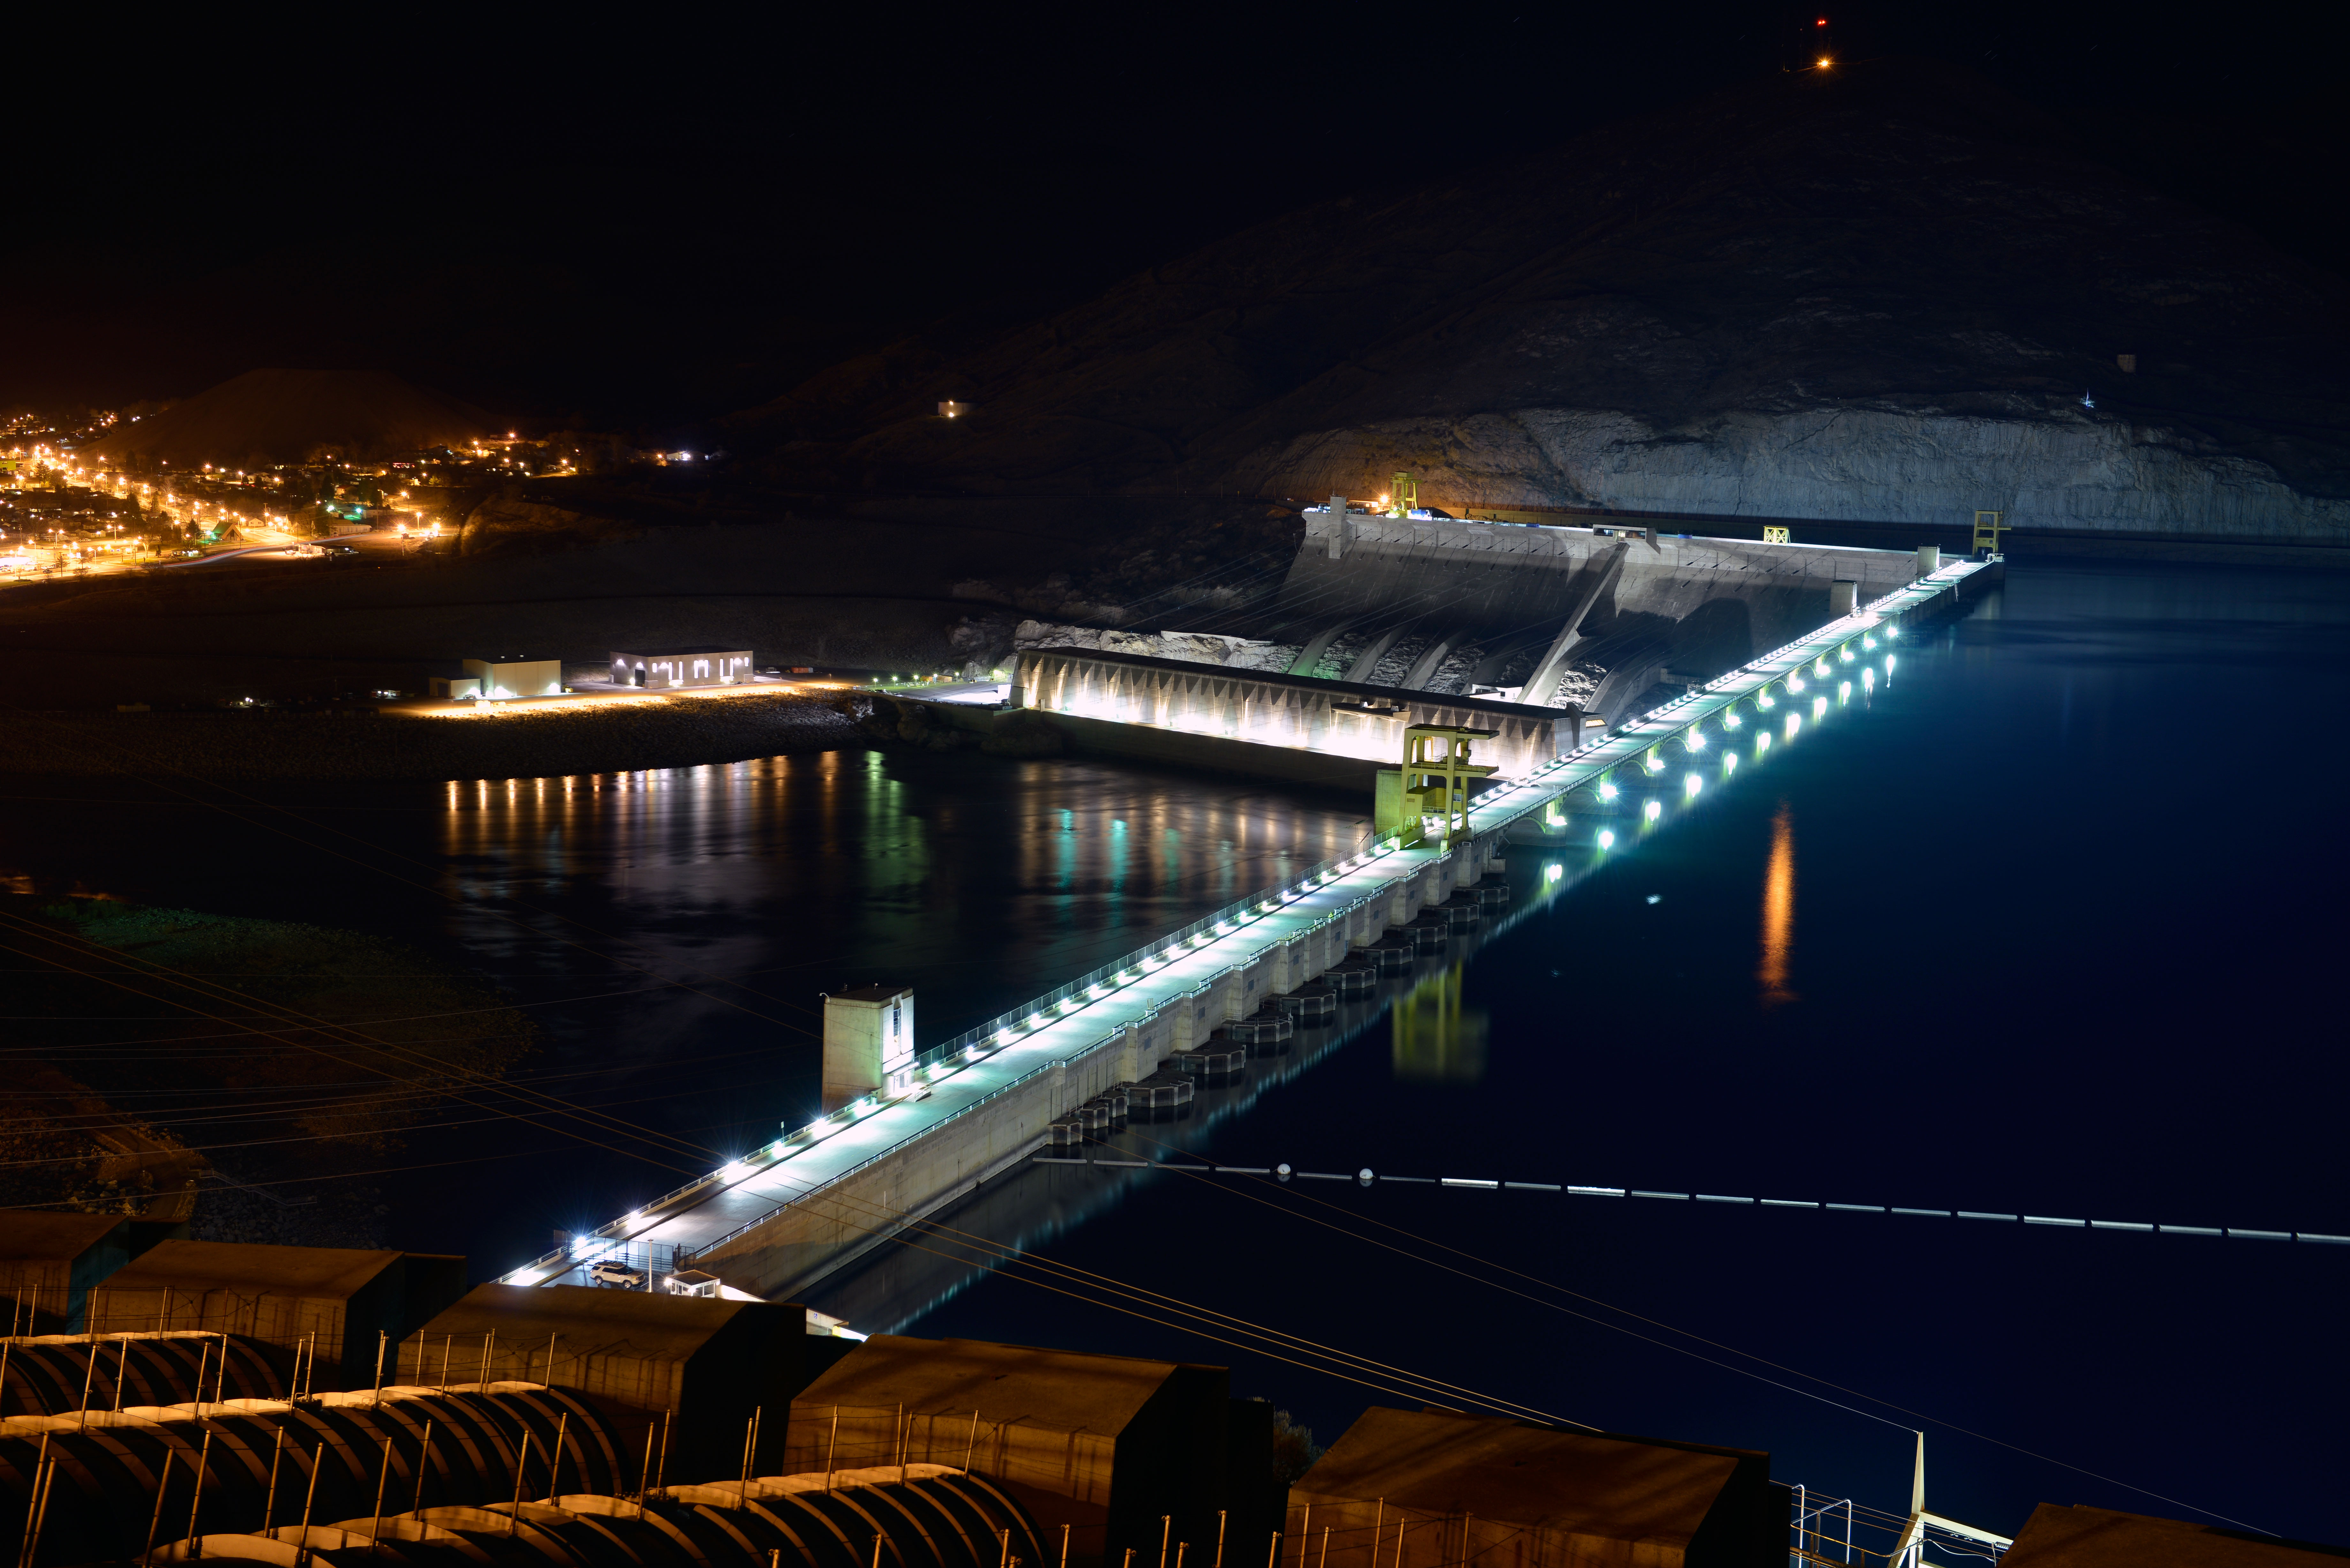 November 21, 2013. Long exposure night shot of Grand Coulee Dam and the Third Powerplant taken from above the John W. Keys III Pump-Generation Plant.